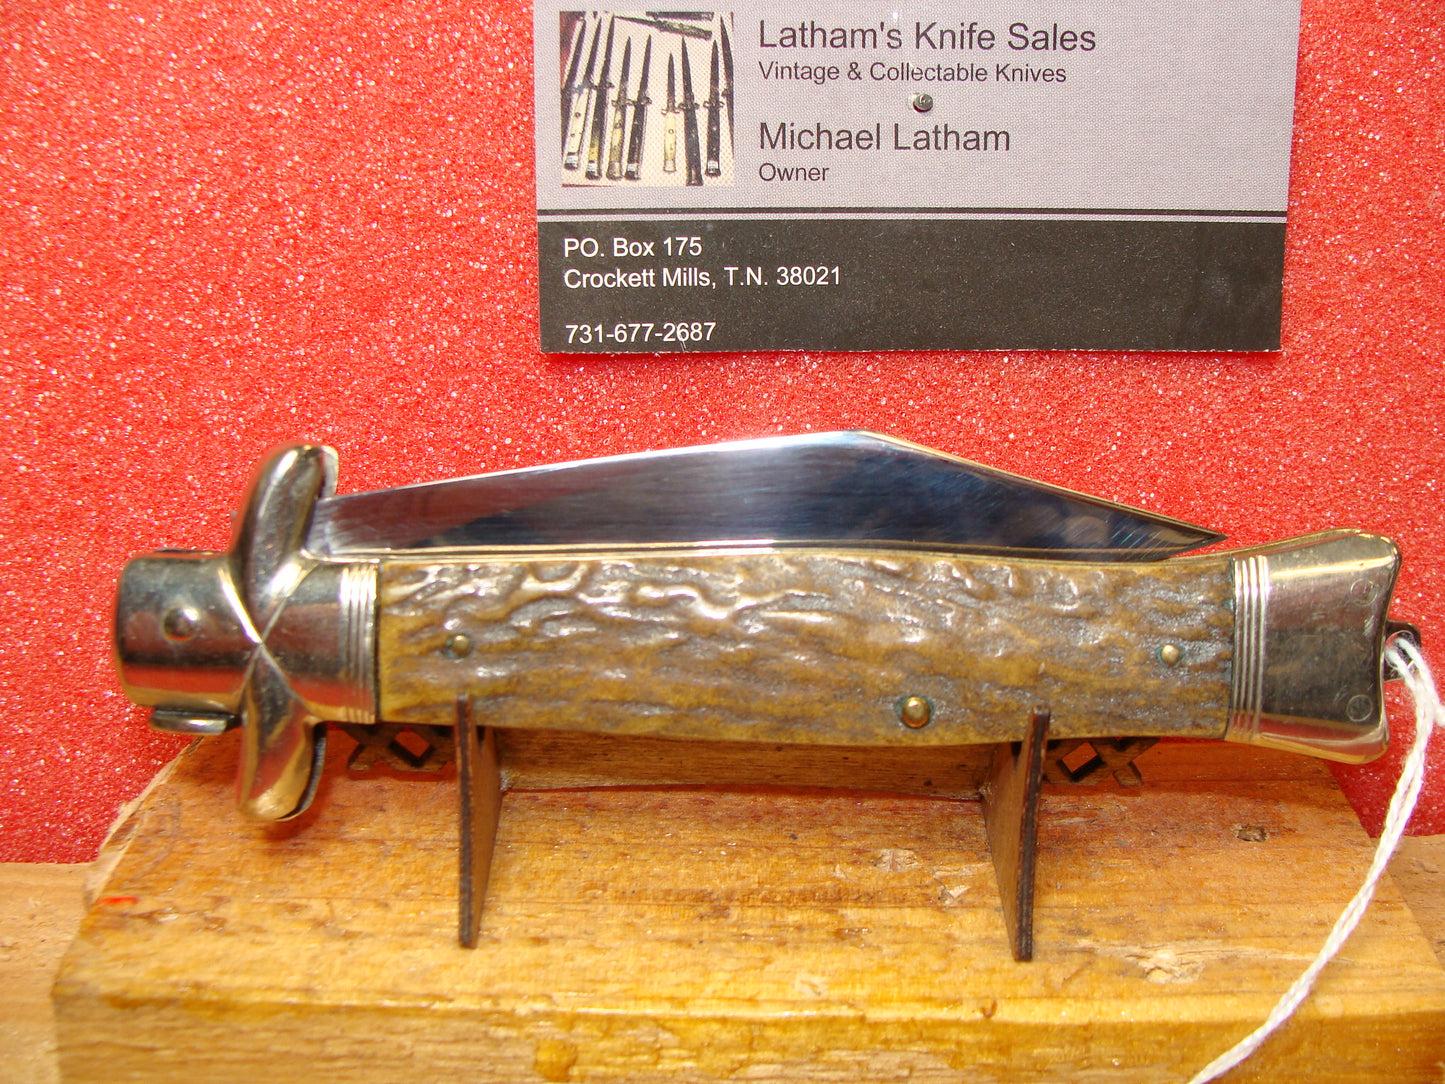 VOSS CUT CO. GERMANY BY ROBI KLAAS 1920-35 LEVER AUTOMATIC LARGE FISH TAIL GERMAN AUTOMATIC KNIFE STAG HANDLES